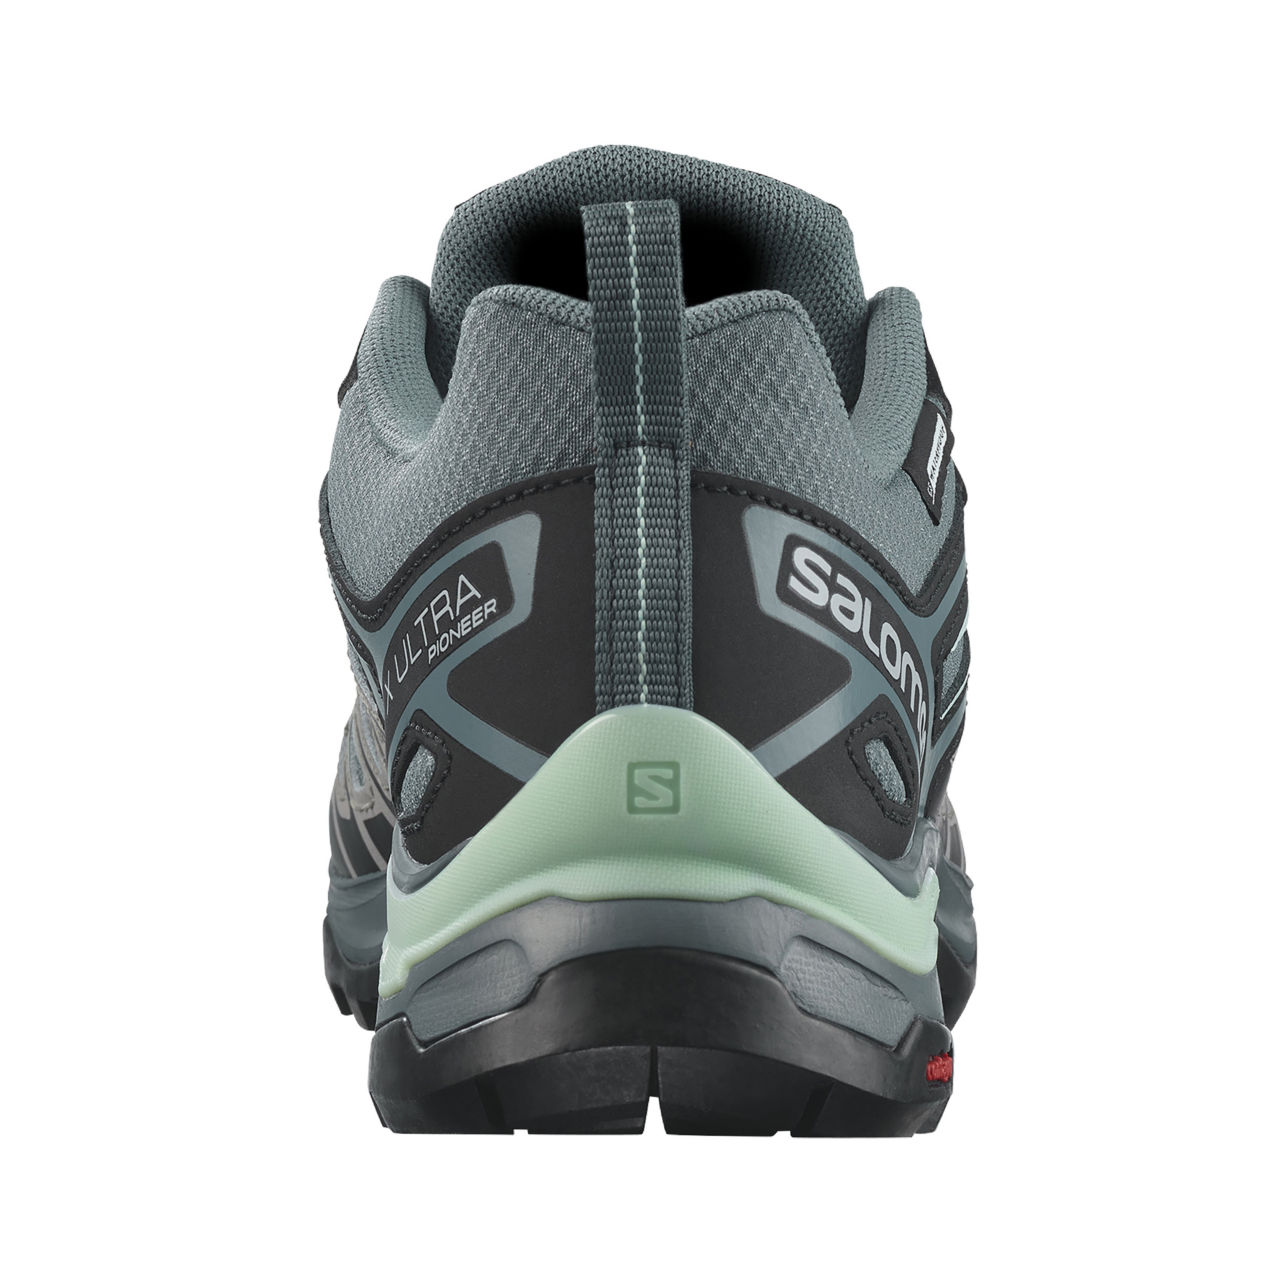 Women’s Salomon® X Ultra Pioneer CSWP Hiking Shoes - STORMY WEATHER image number 2